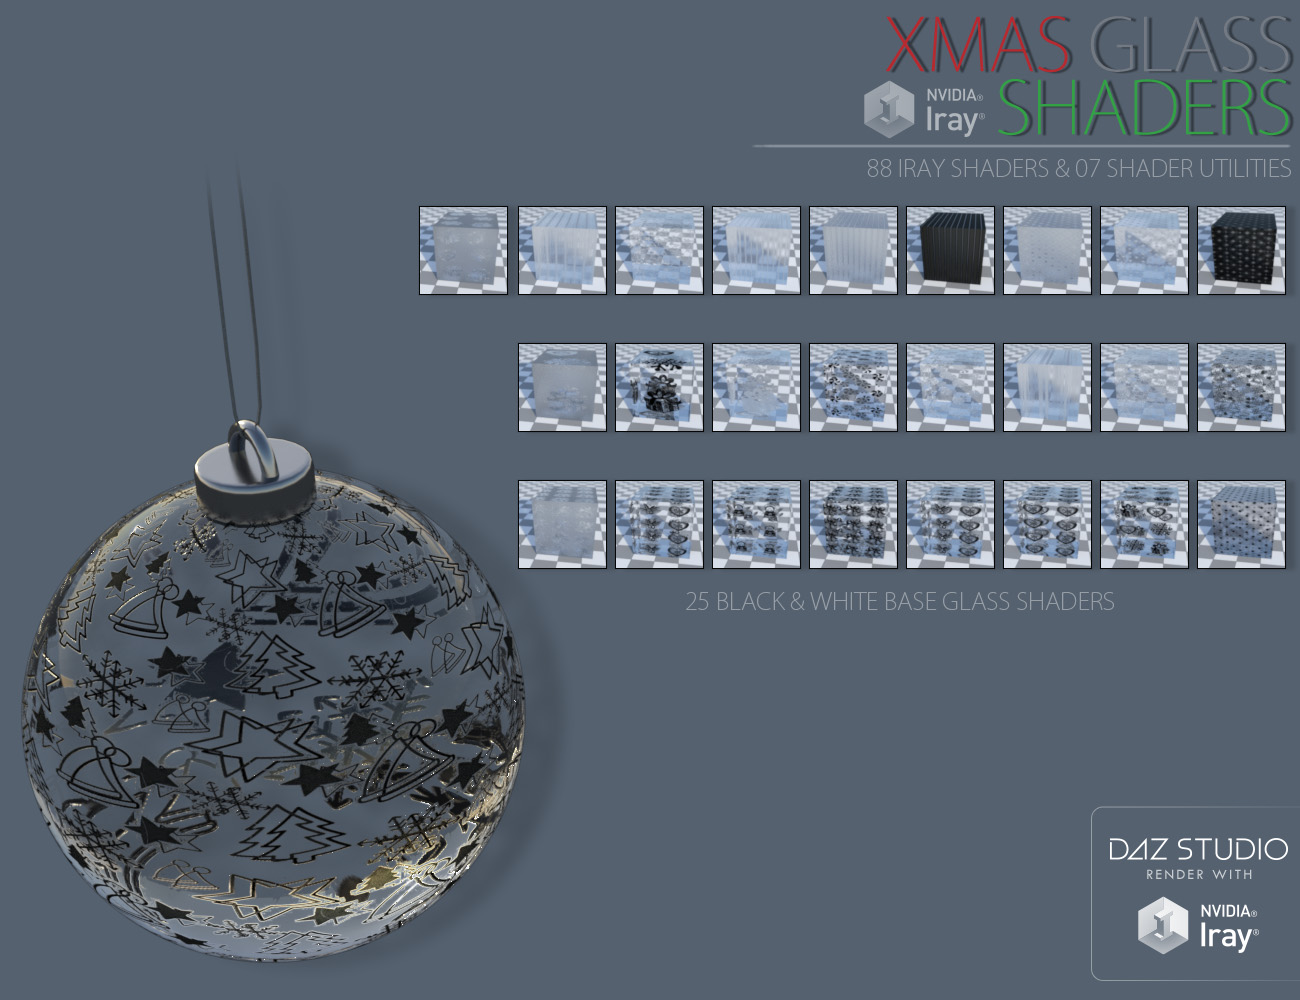 Xmas Glass Iray Shaders by: ForbiddenWhispers, 3D Models by Daz 3D